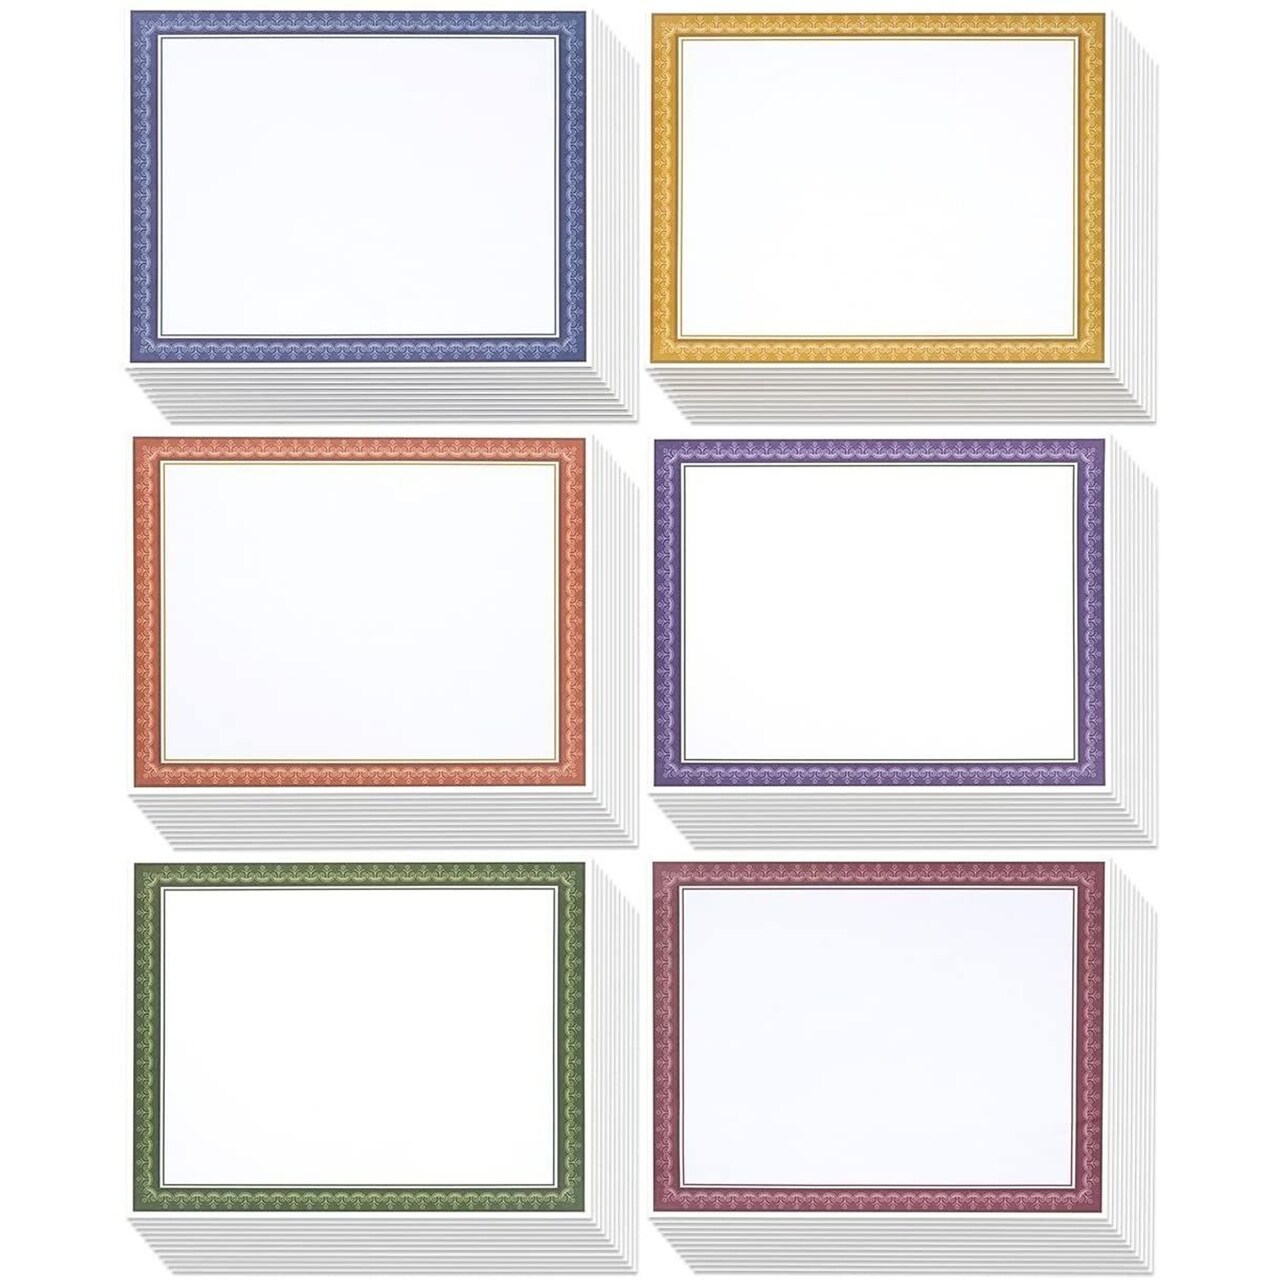 96 Sheets Certificate Paper for Printing - Customizable Blank Cardstock  with Colored Borders for Graduation Diploma, Achievement Awards,  Recognition Documents (8.5 x 11 in, 6 Assorted Colors)